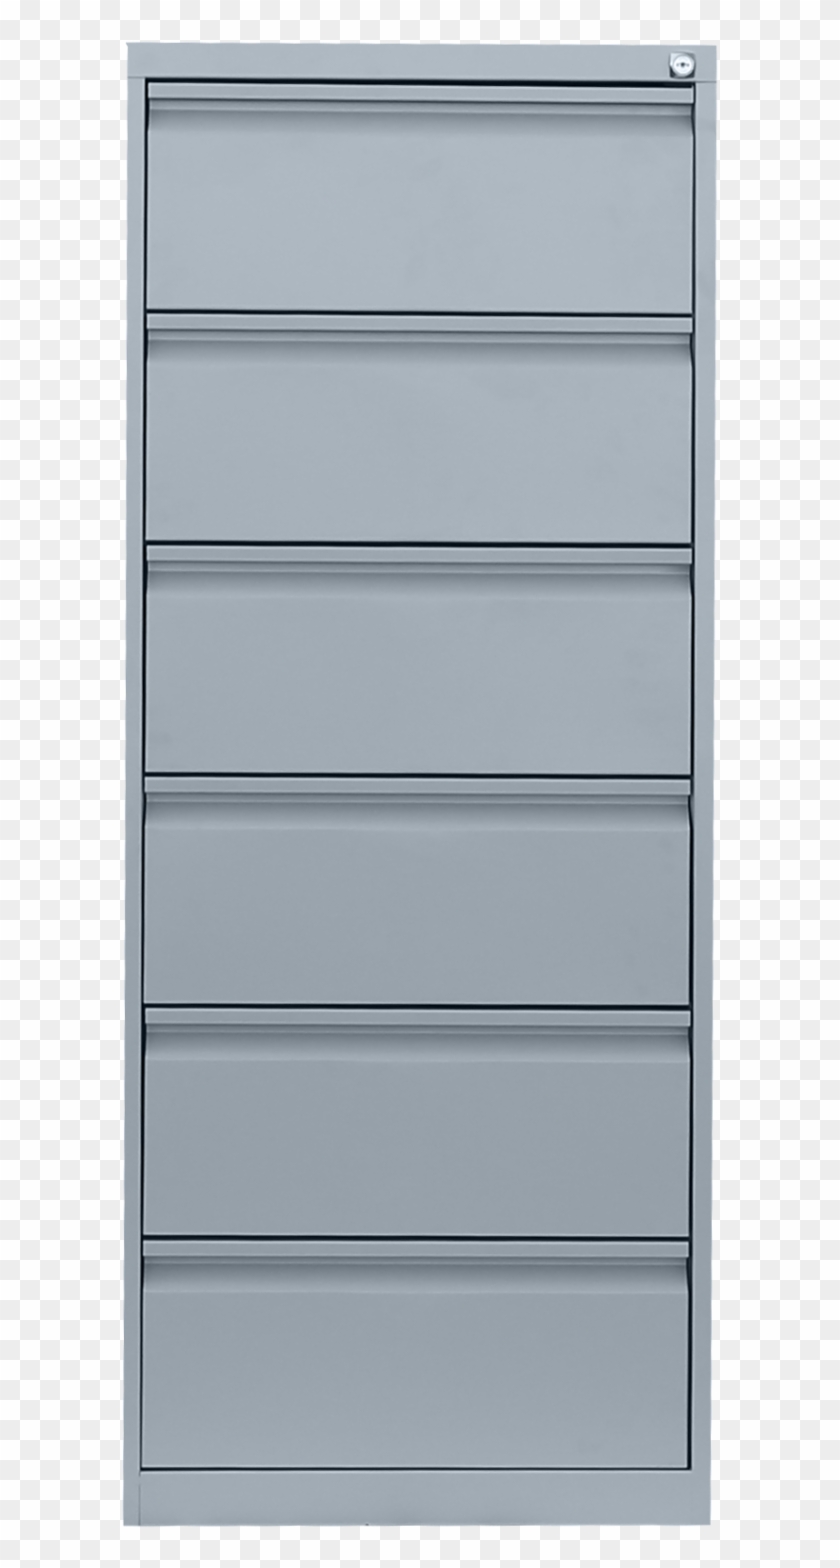 565620 - Card-index Cabinet - Chest Of Drawers Clipart #1358735